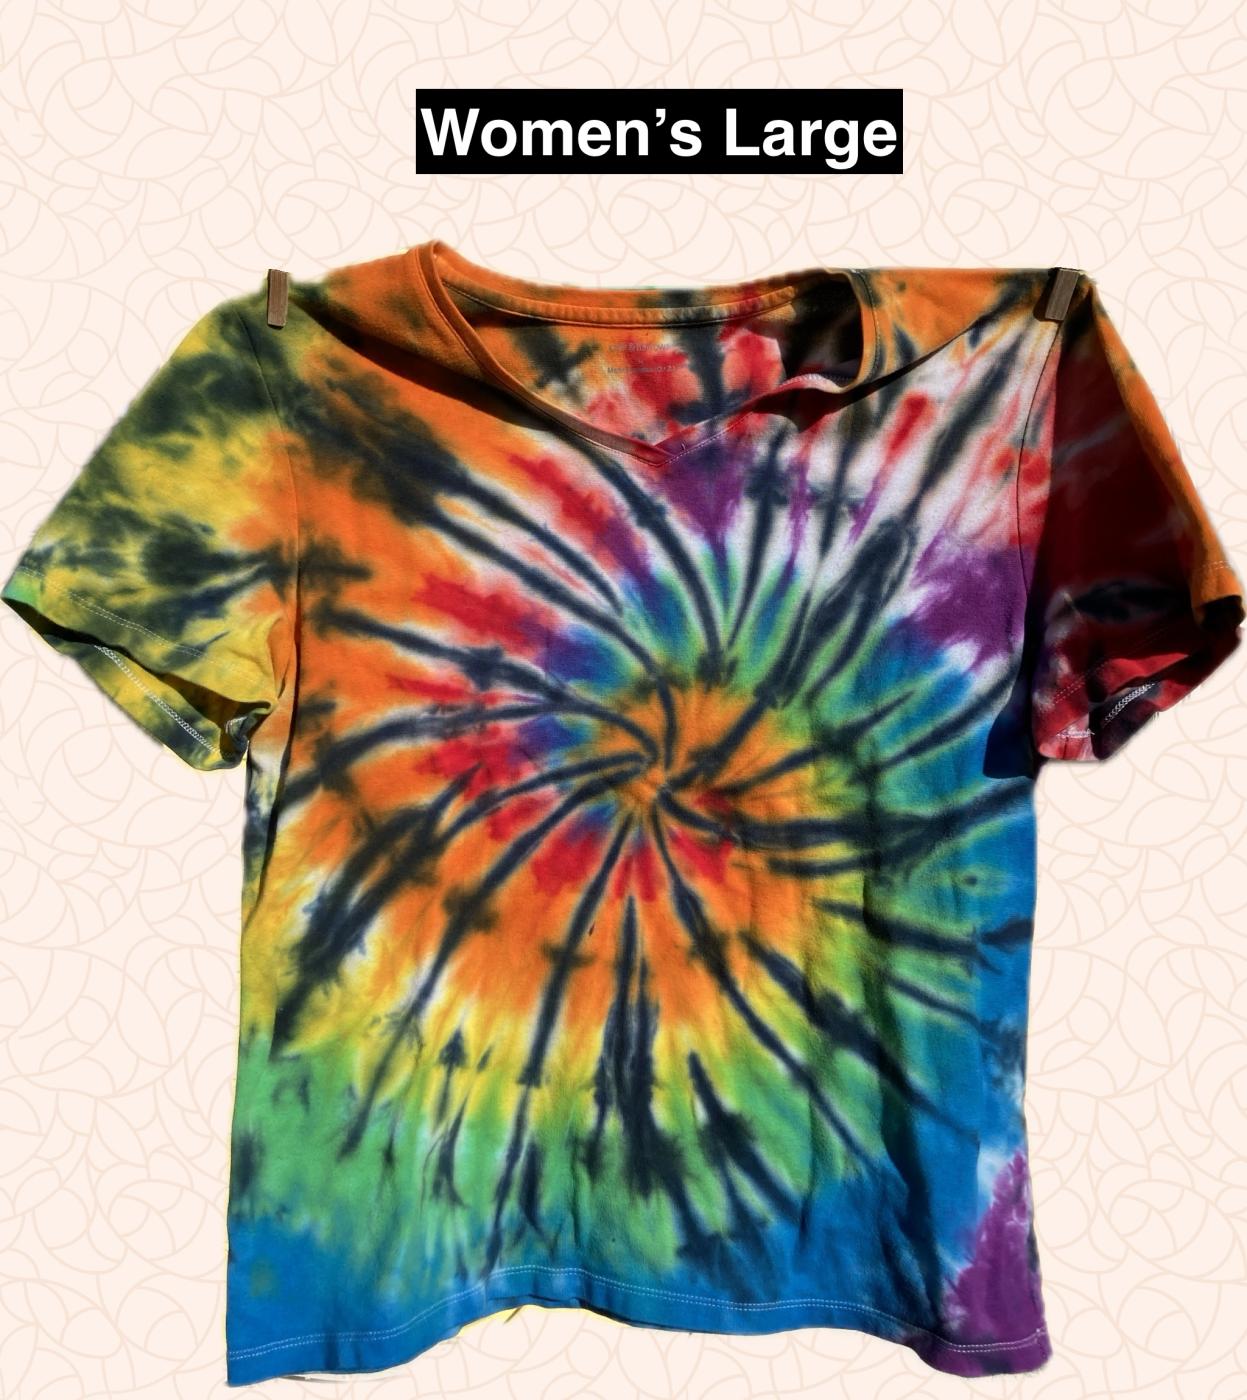 Rainbow and Black Spiral Tie Dye T Shirt Women's Large